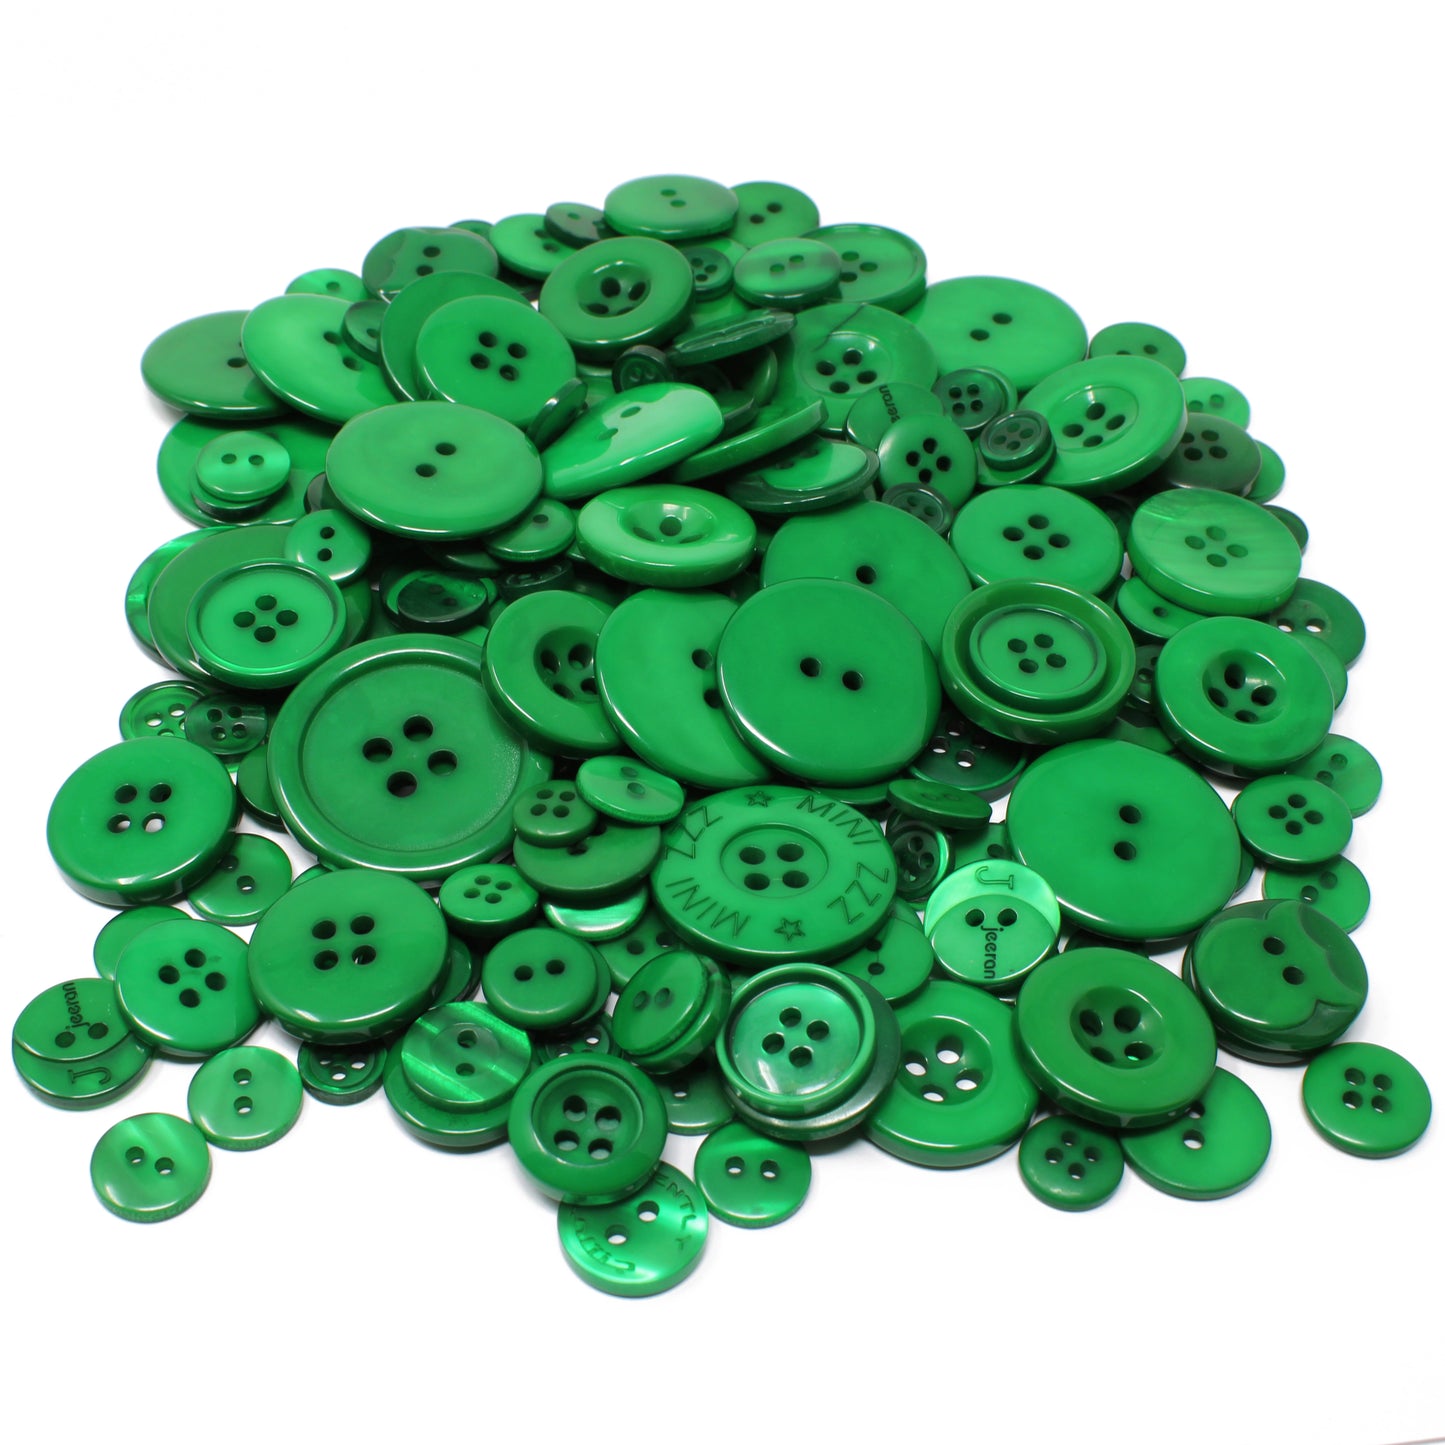 Dark Green 100g Bags Of Mix Acrylic & Resin Buttons